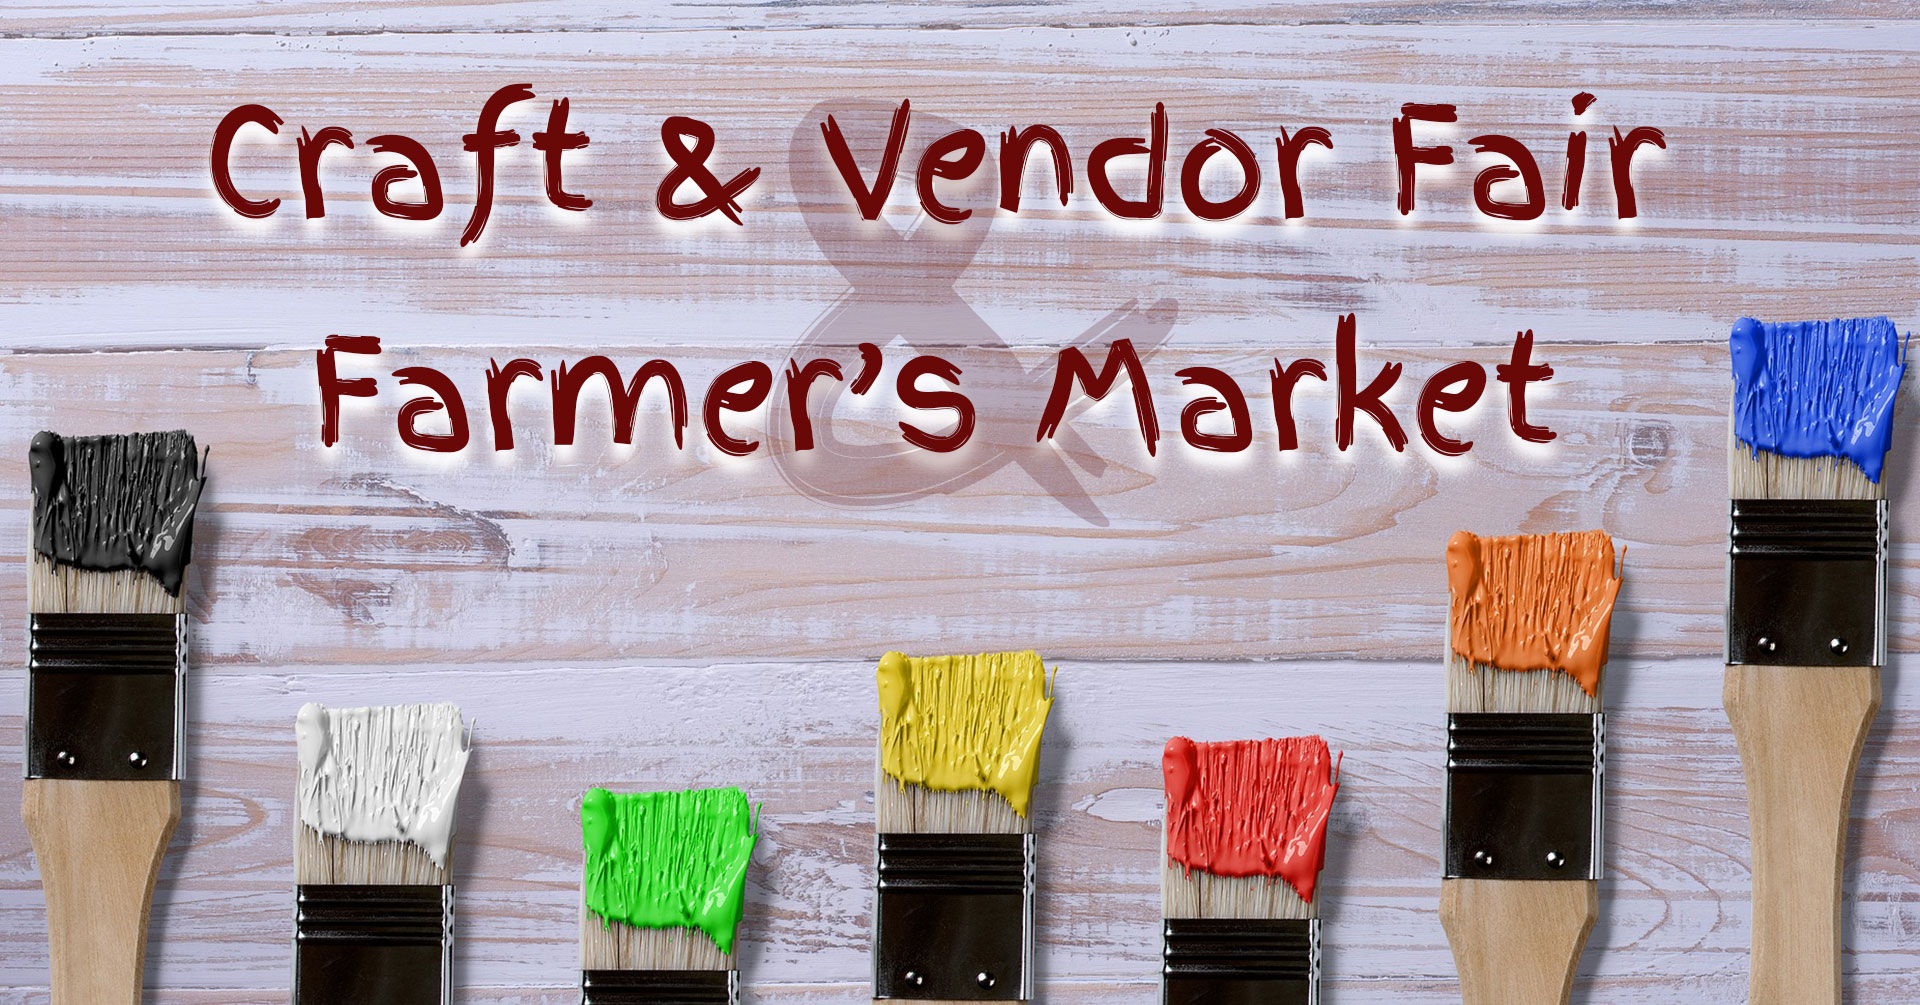 Carr-Valley-Craft-and-Vendor-Fair-and-Farmers-Market-in-Fennimore